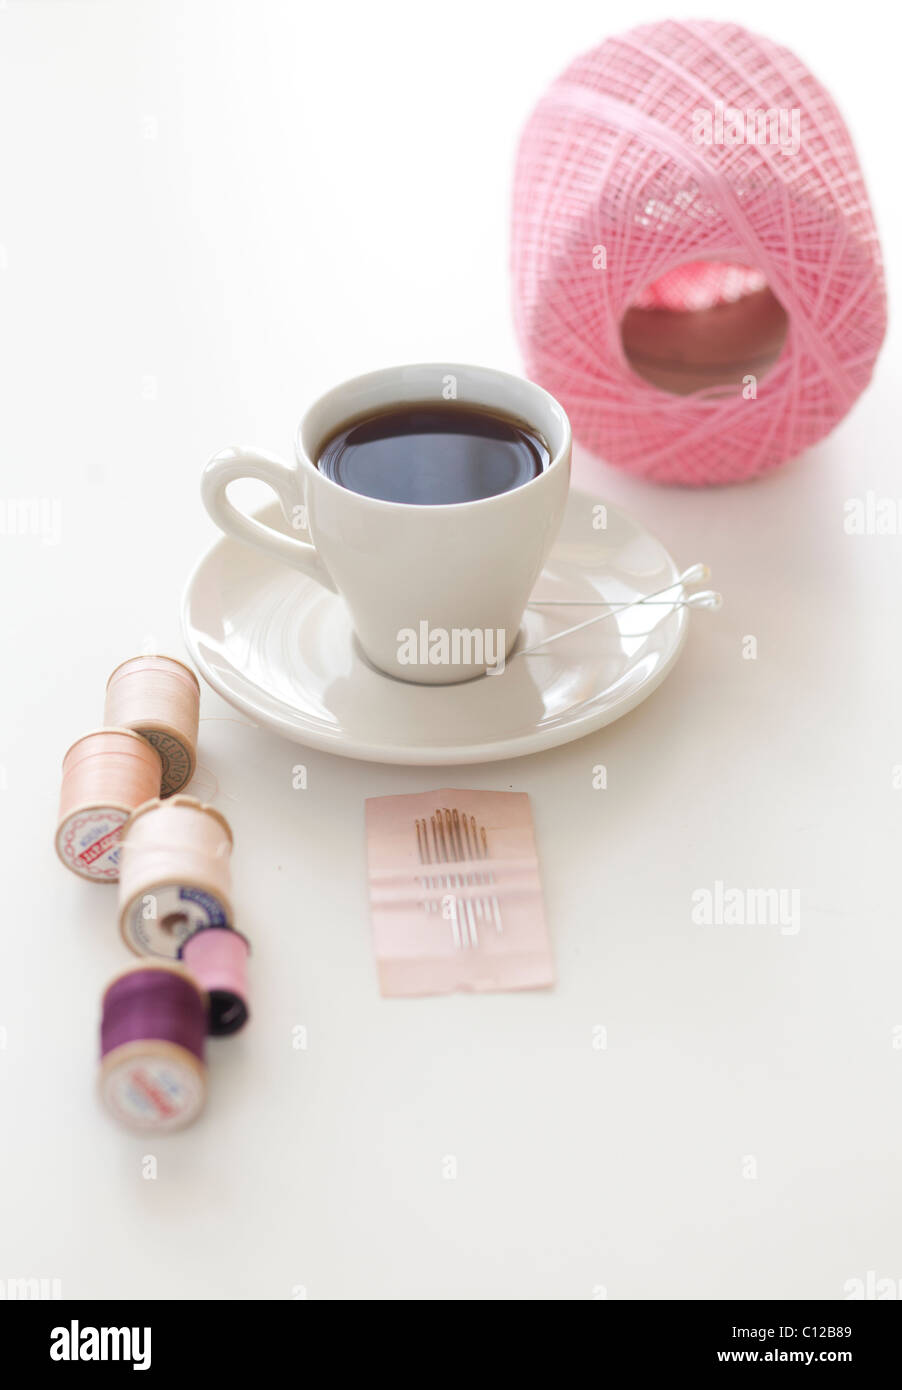 tea cup with pink sewing materials Stock Photo